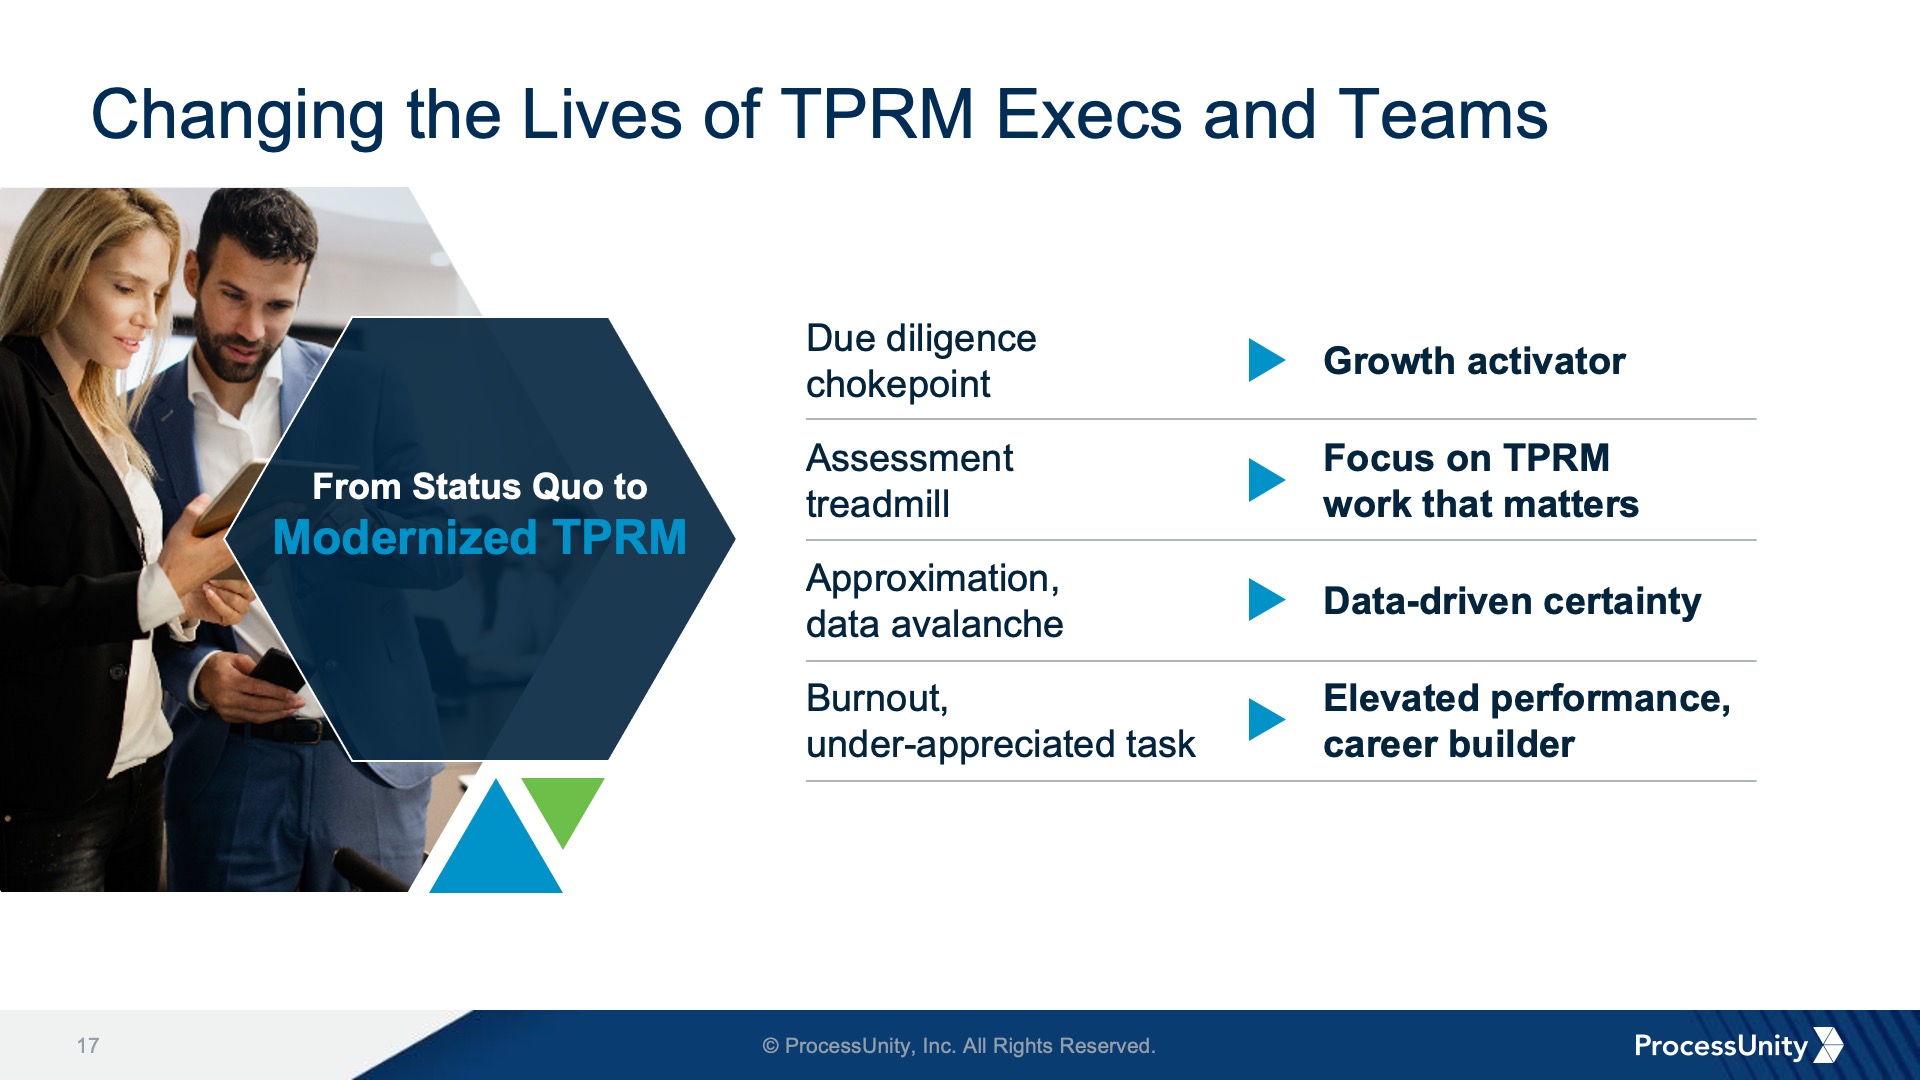 A slide design from the Process Unity presentation that lists ways to modernize TPRM for execs and teams.